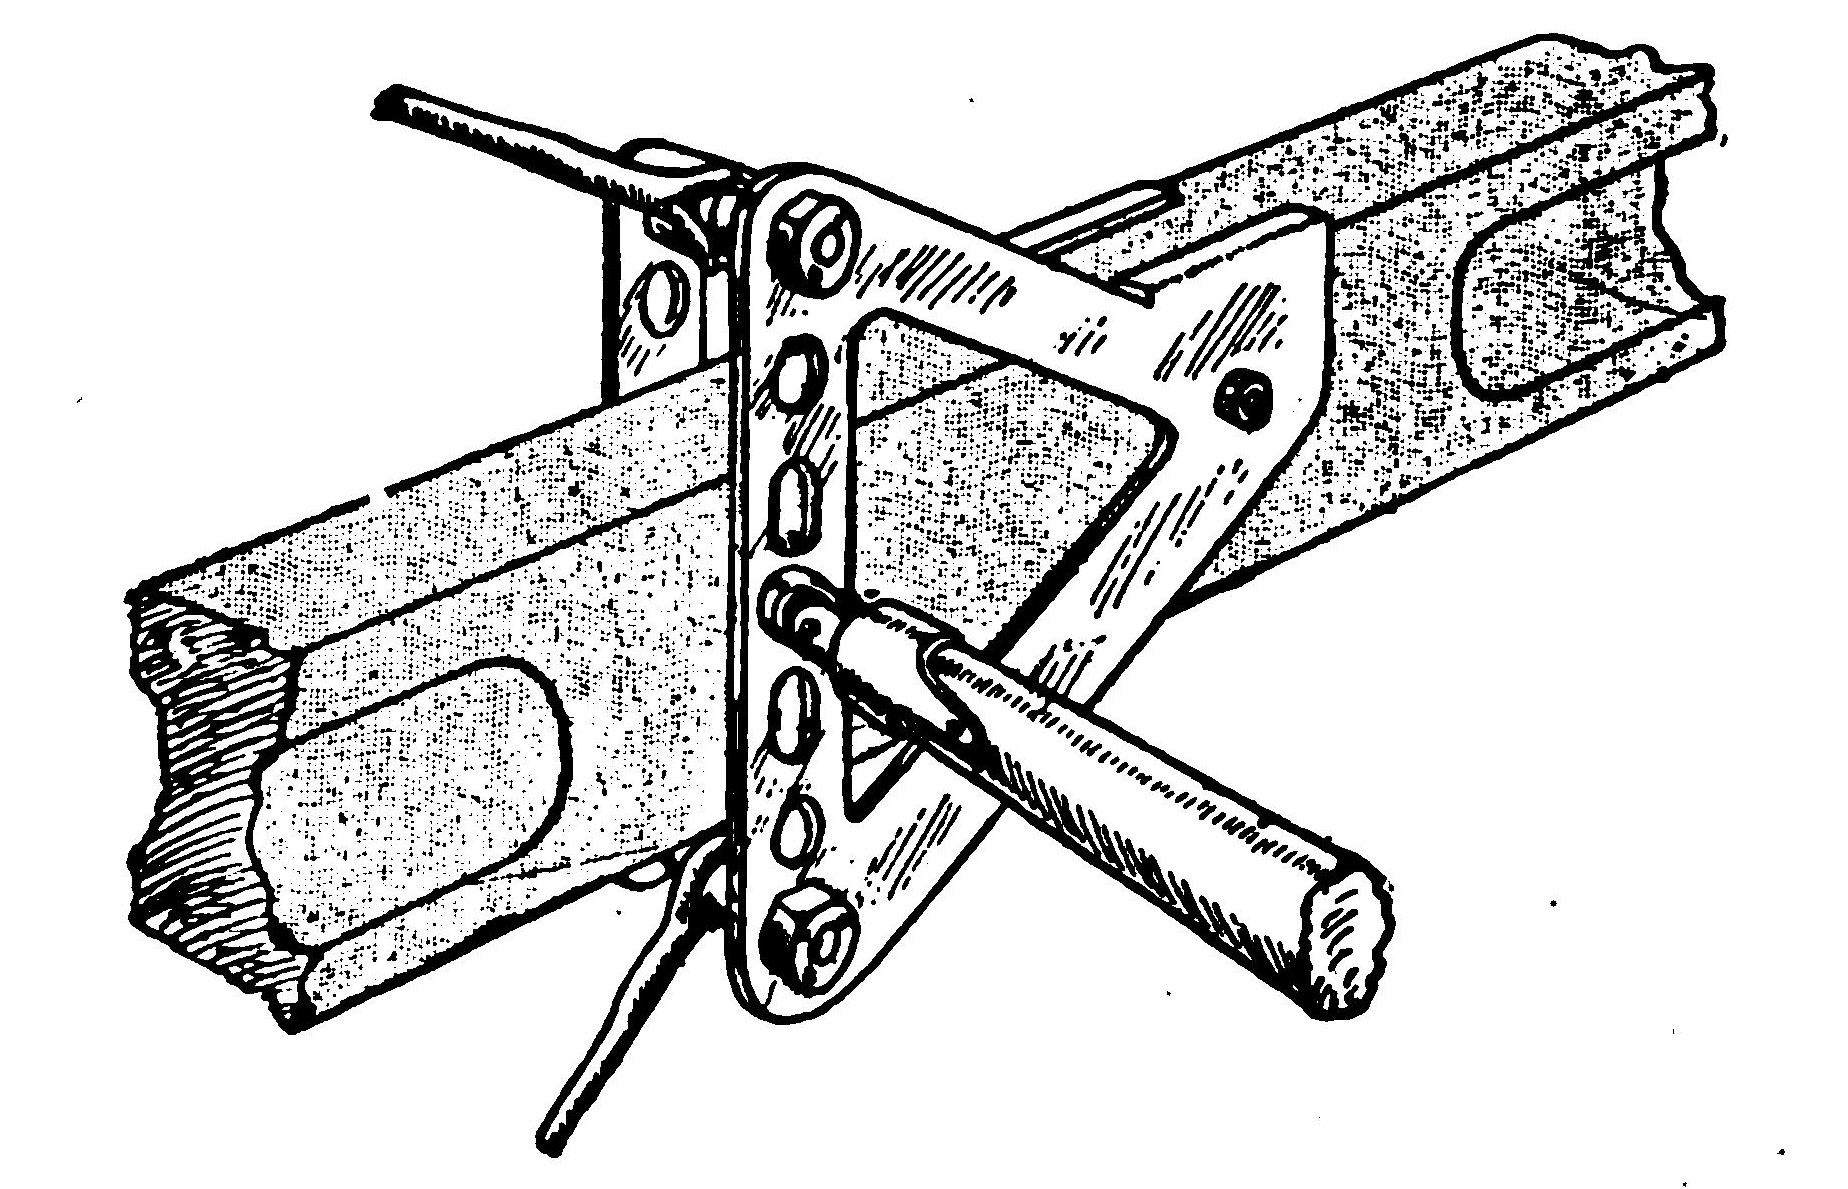 Fig. 14. Plate Connection for Monoplane Stay Wire Connection to Spar.